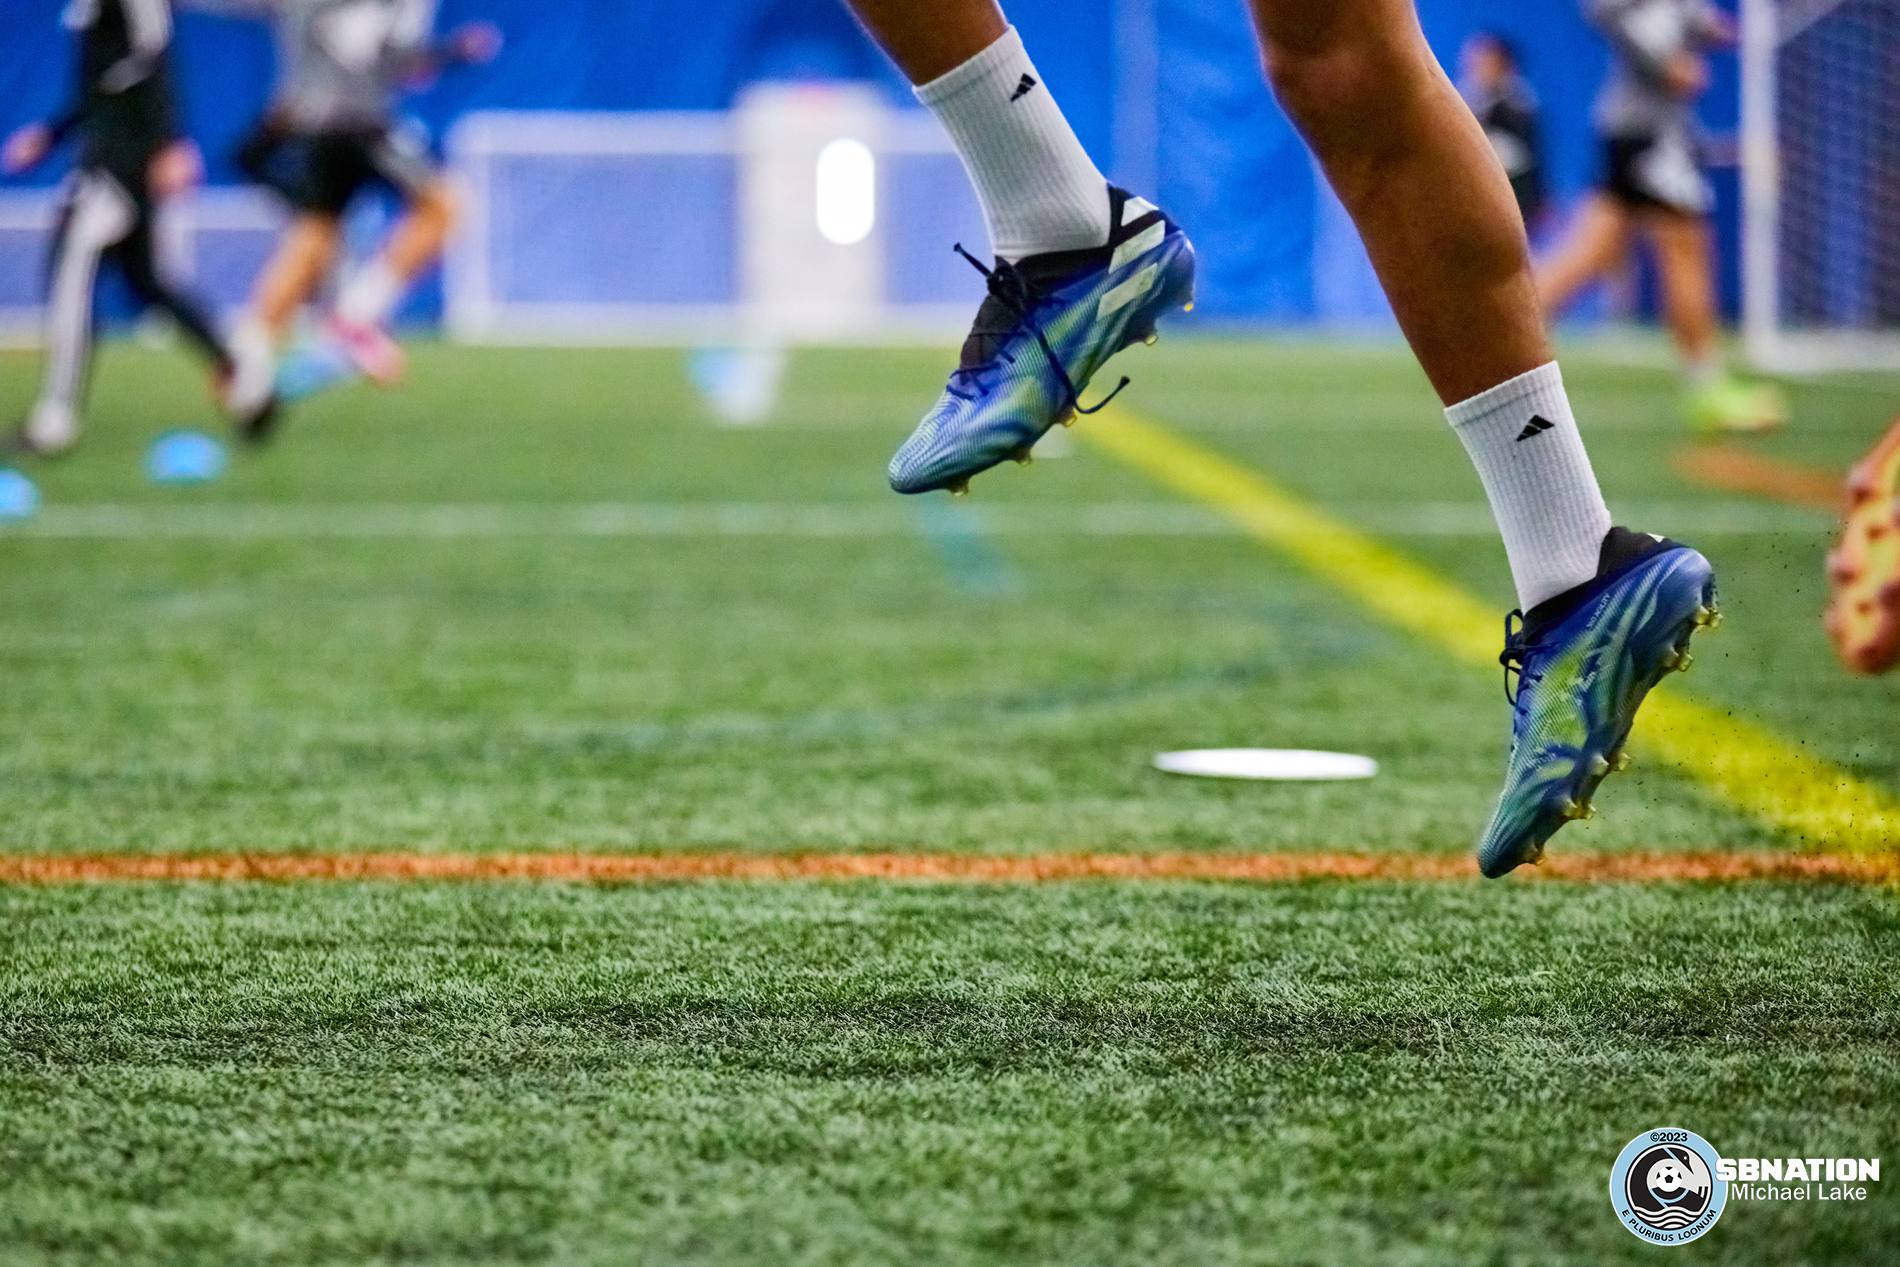 A close-up of a pair of blue Adidas cleats are in focus as their owner skips in warmups, with other cleated feet out of focus in the background.